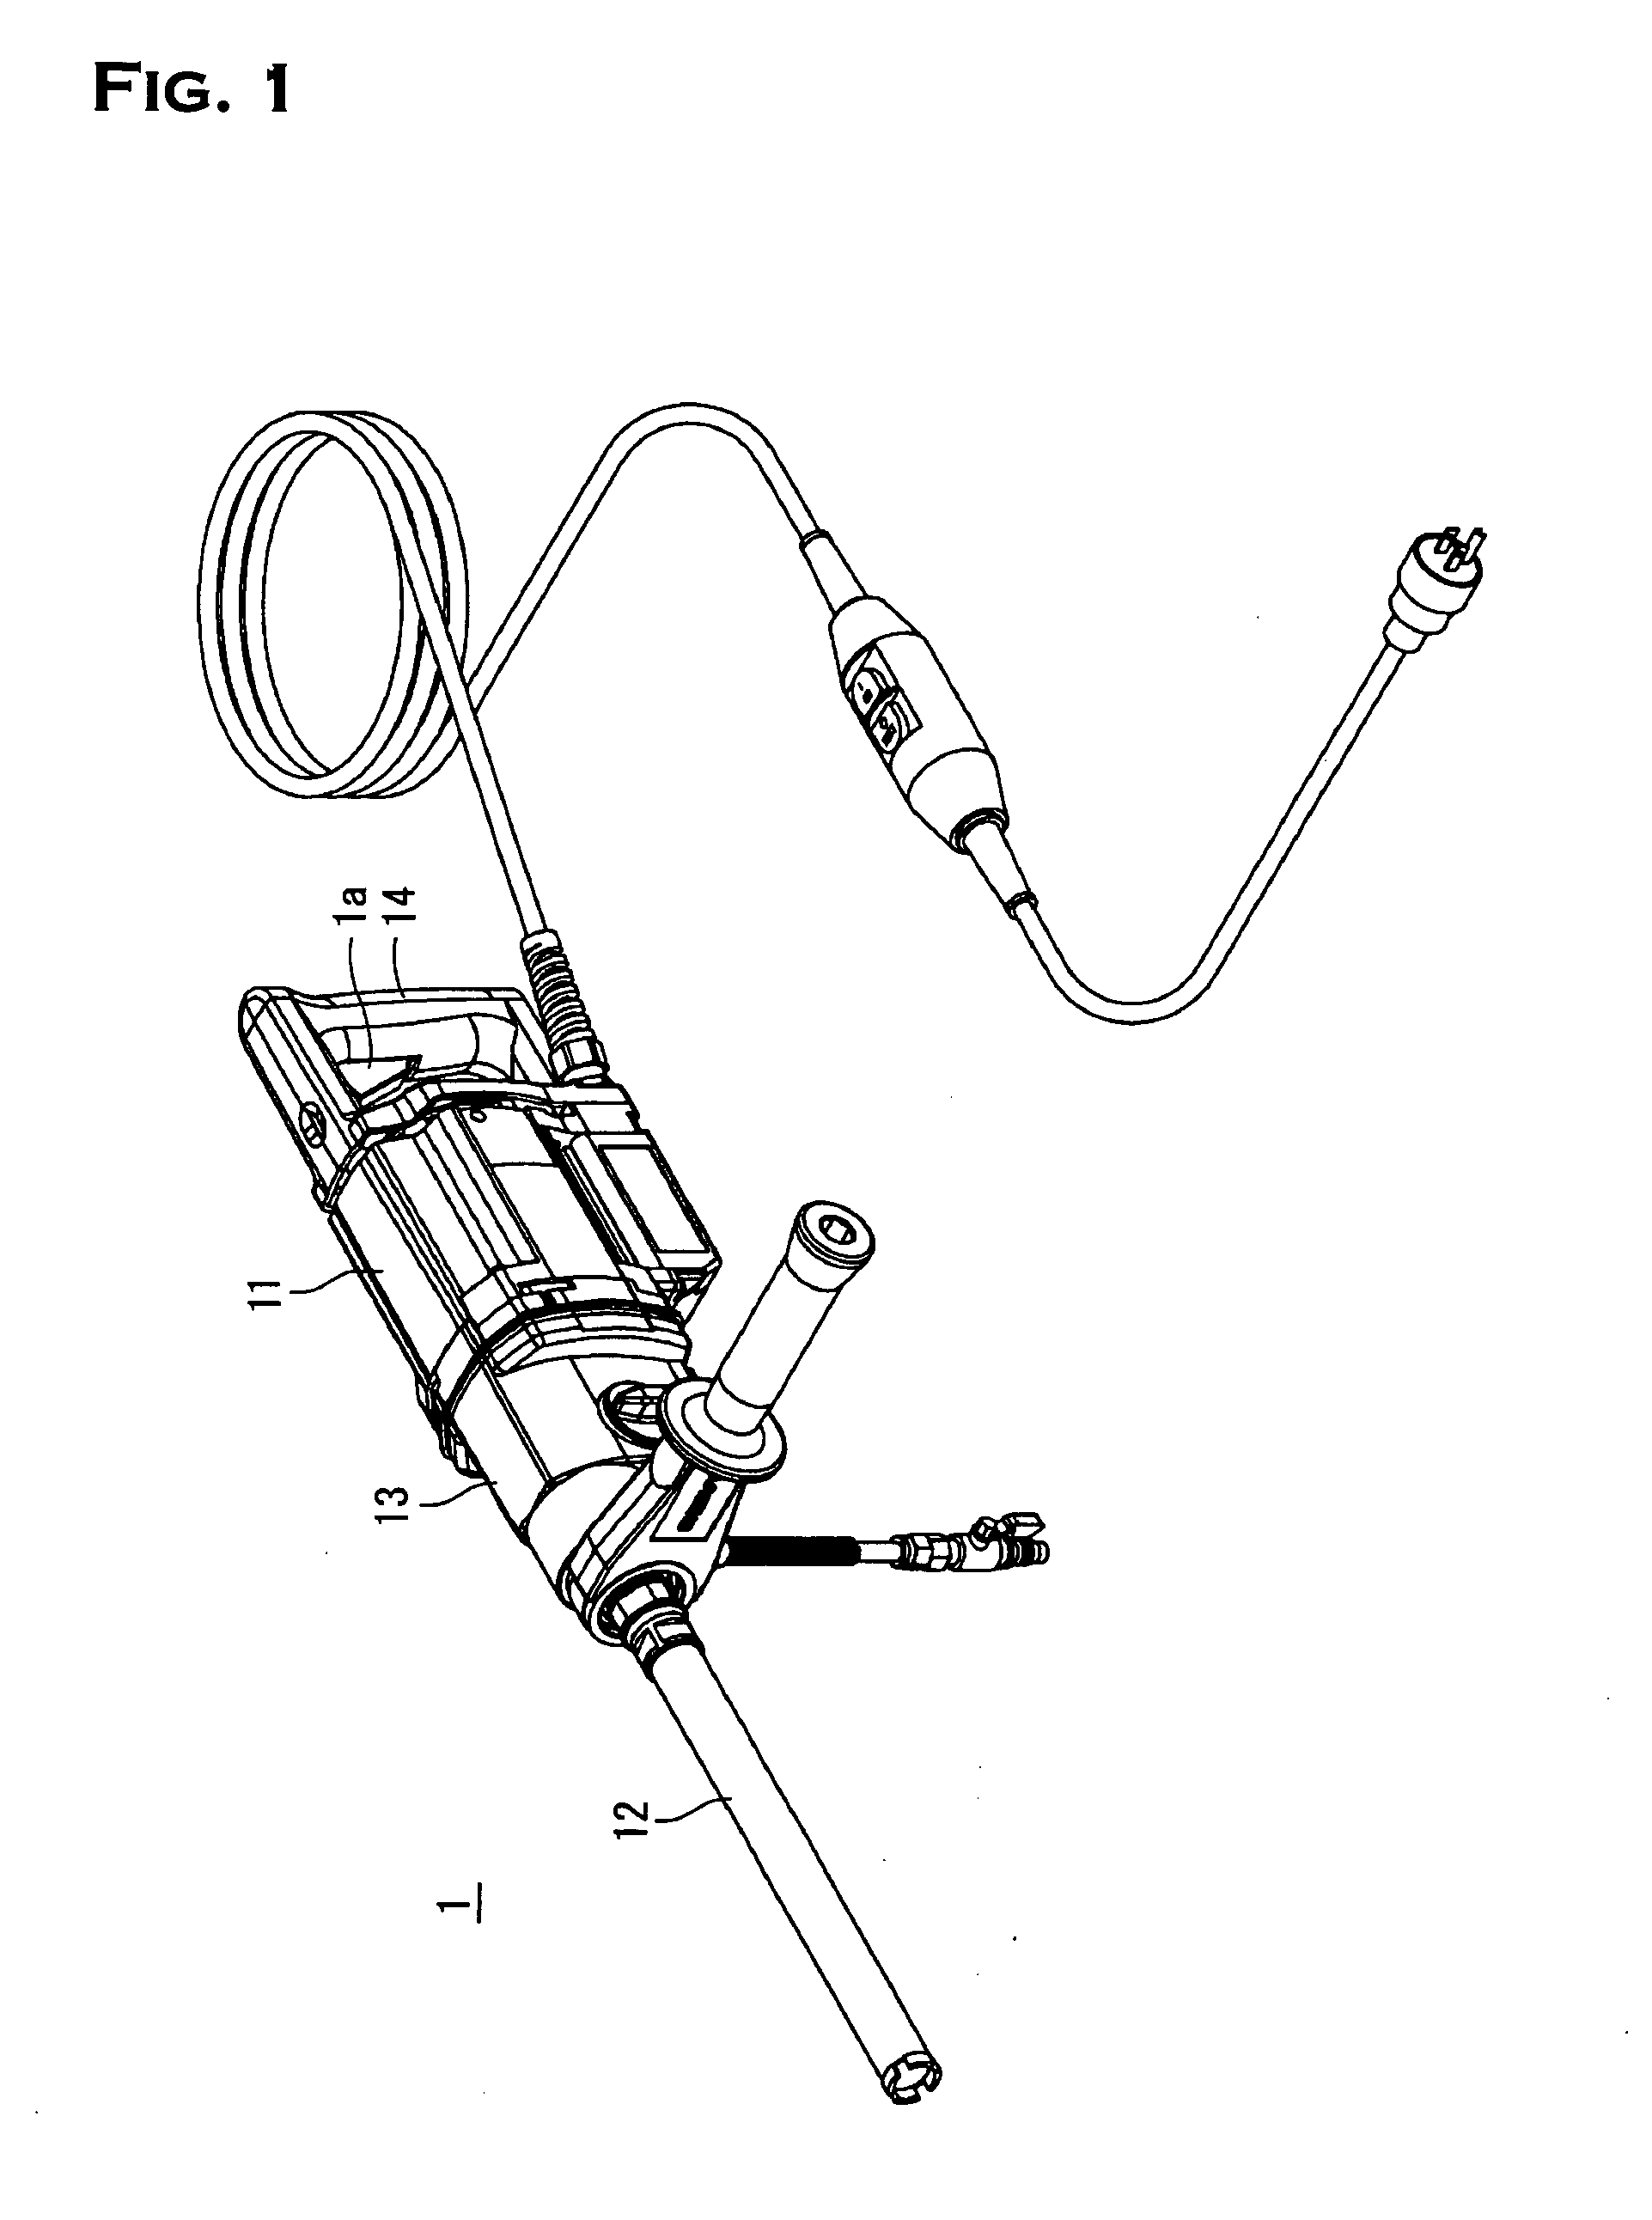 Power transmission device for power tool